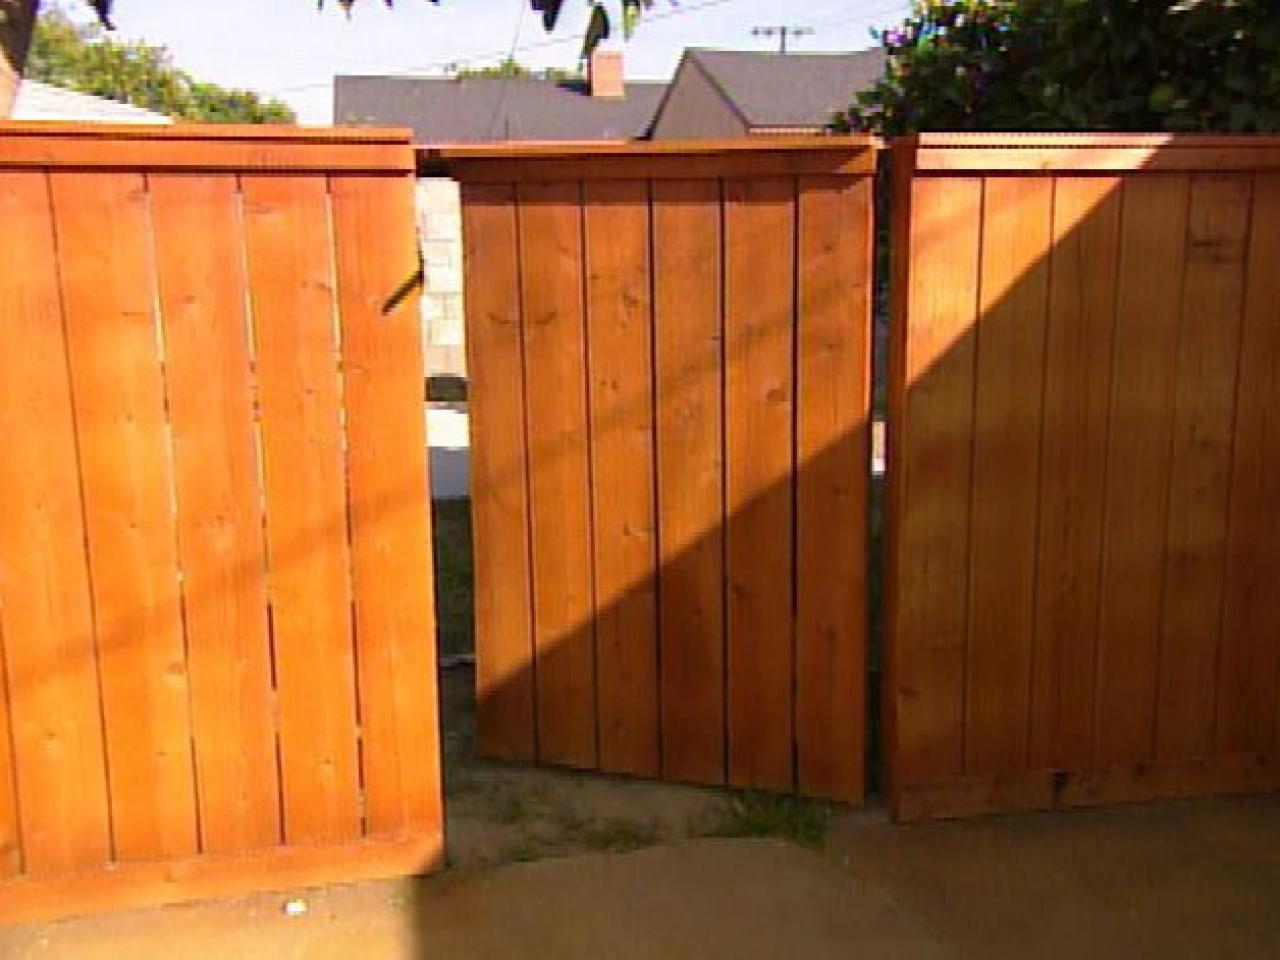 How To Building A Wooden Gate, How To Build A Simple Wooden Garden Gate